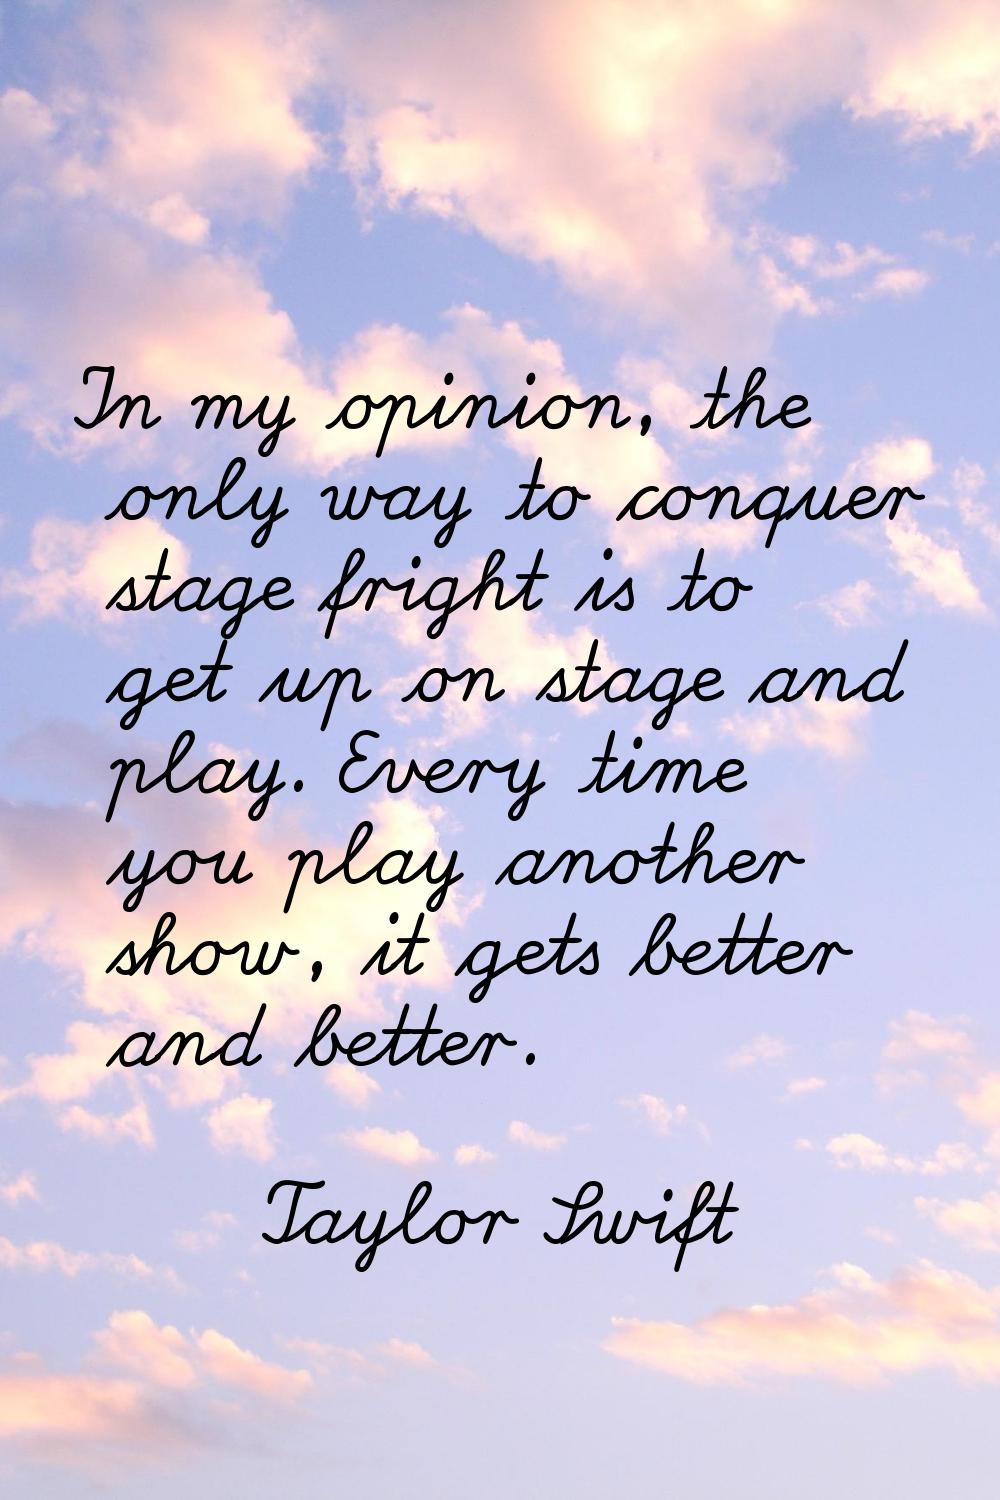 In my opinion, the only way to conquer stage fright is to get up on stage and play. Every time you 